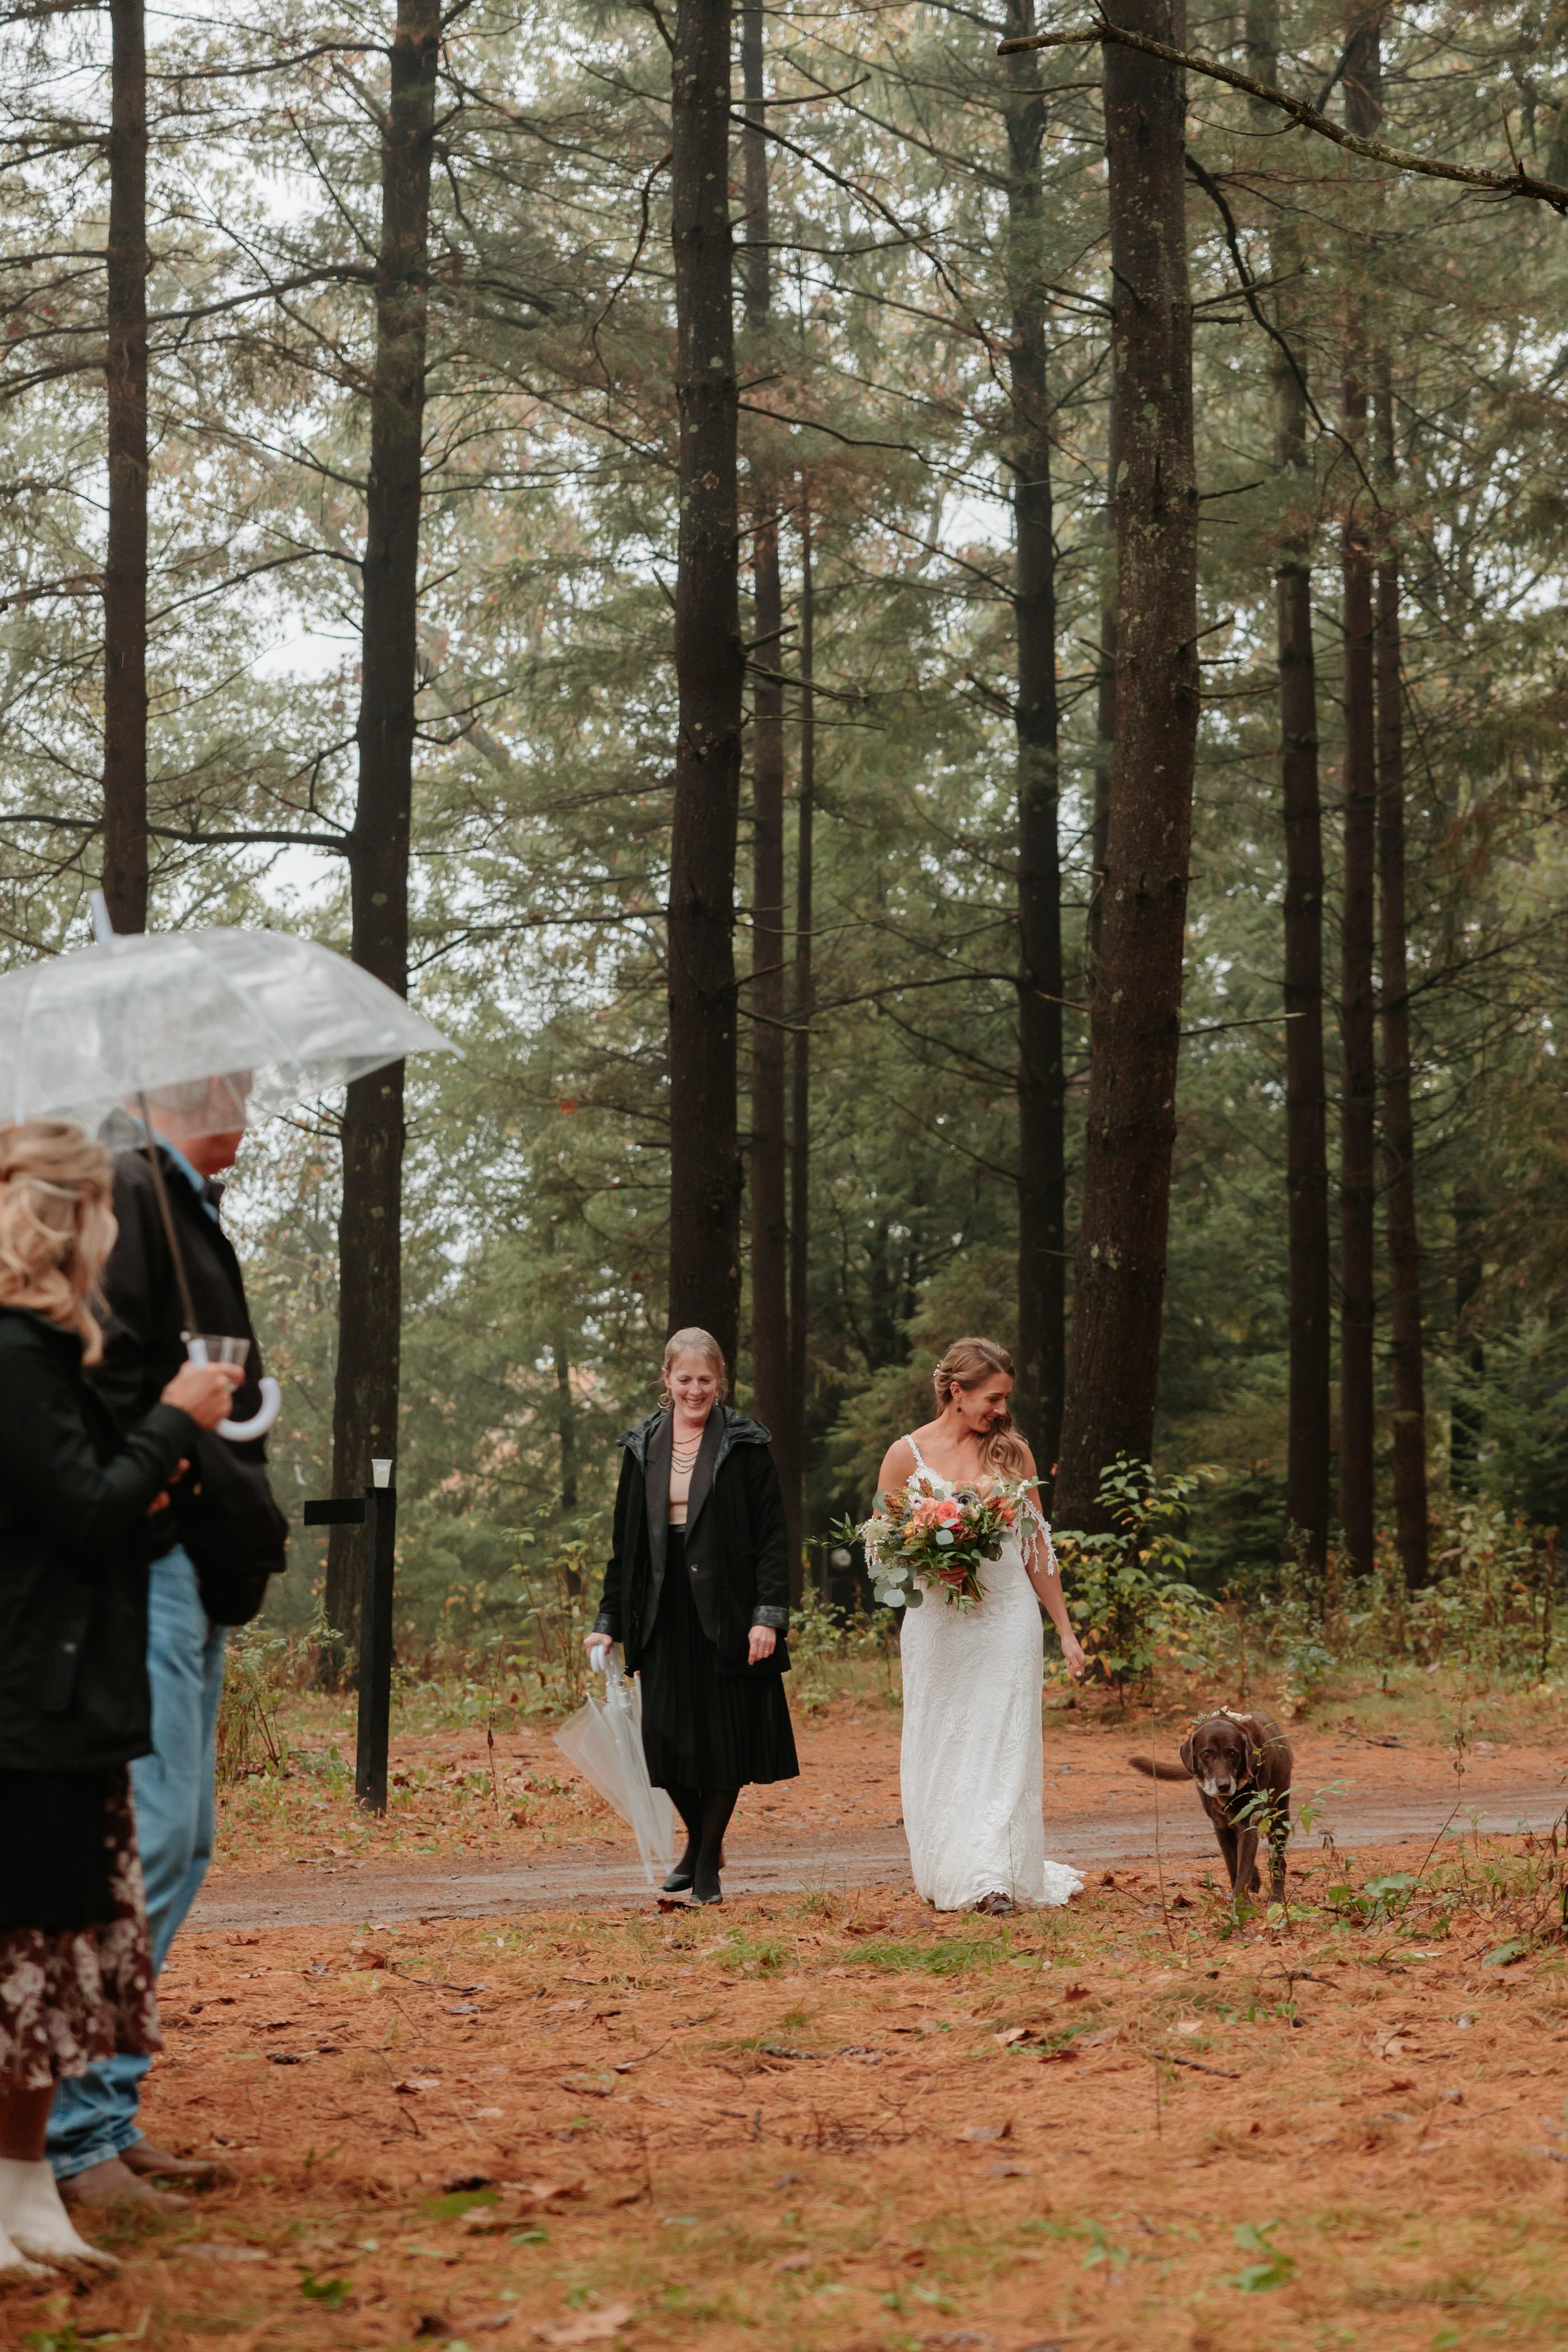 Bride walks down outside aisle with her dog.